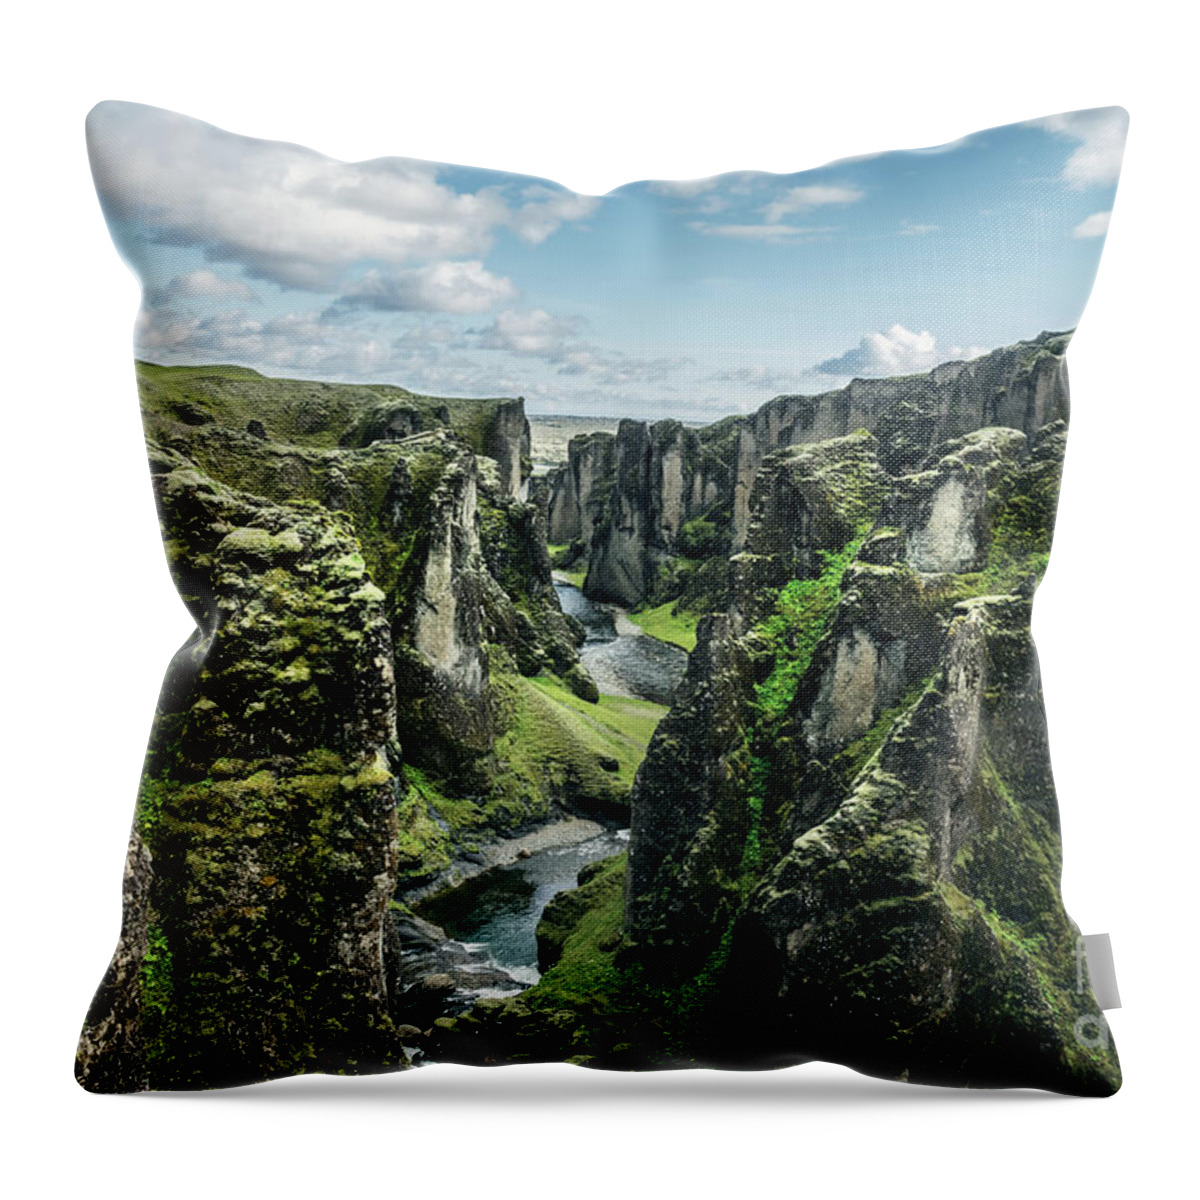 Iceland Throw Pillow featuring the photograph Fjadrargljufur canyon, Iceland by Delphimages Photo Creations